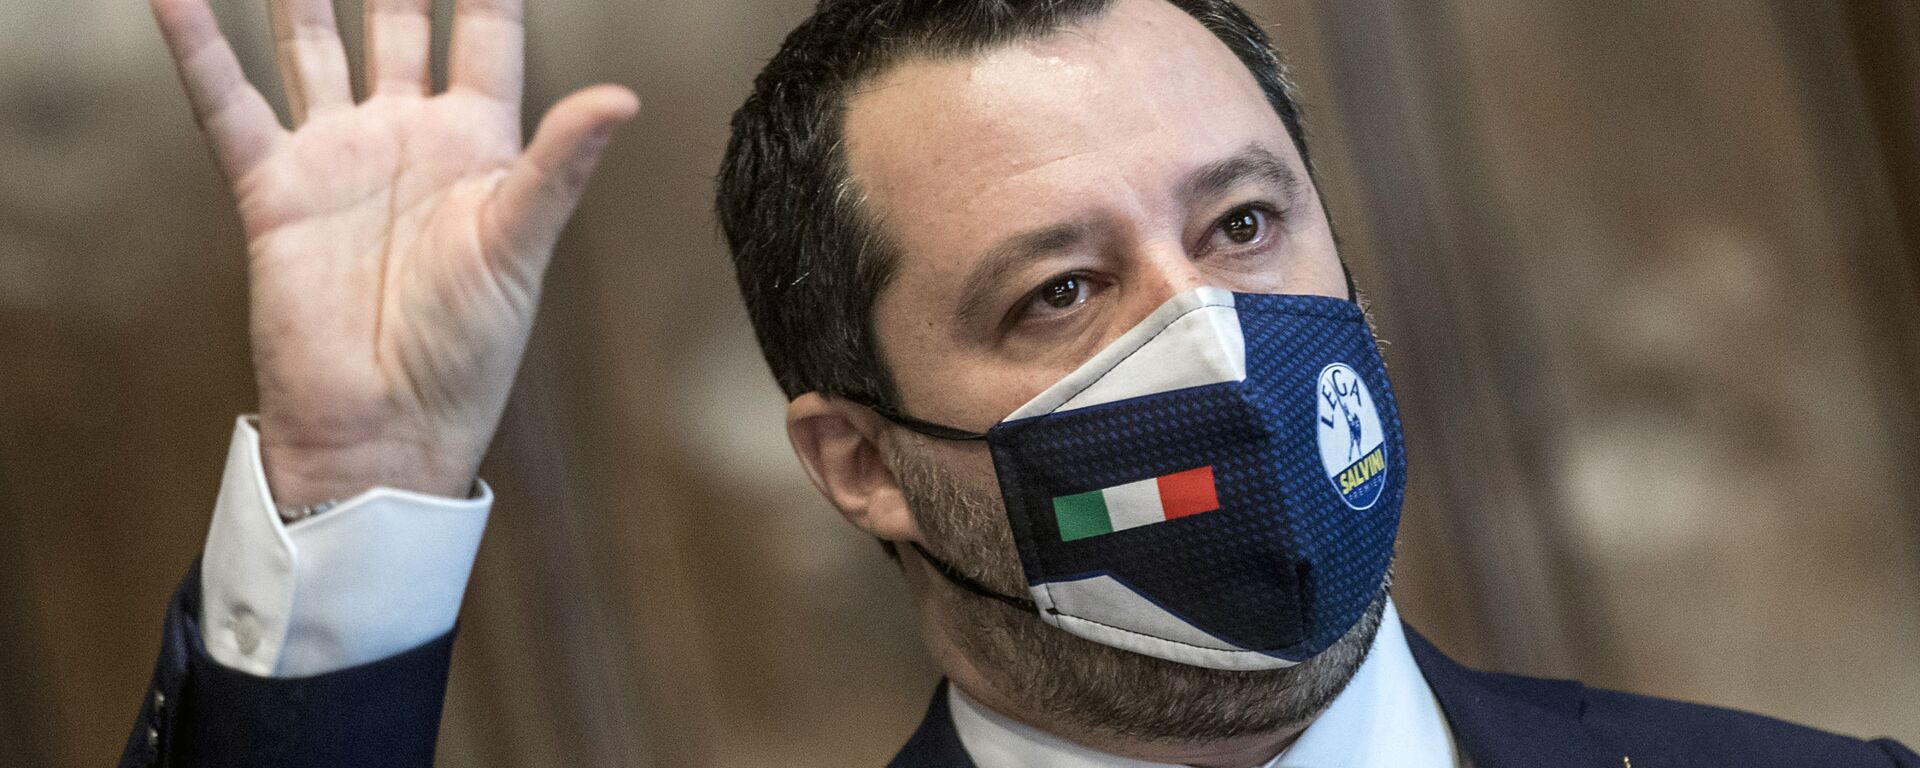 The League's Matteo Salvini addresses the media after meeting with Mario Draghi, at the Chamber of Deputies in Rome, Saturday, Feb. 6, 2021 - Sputnik International, 1920, 23.10.2021